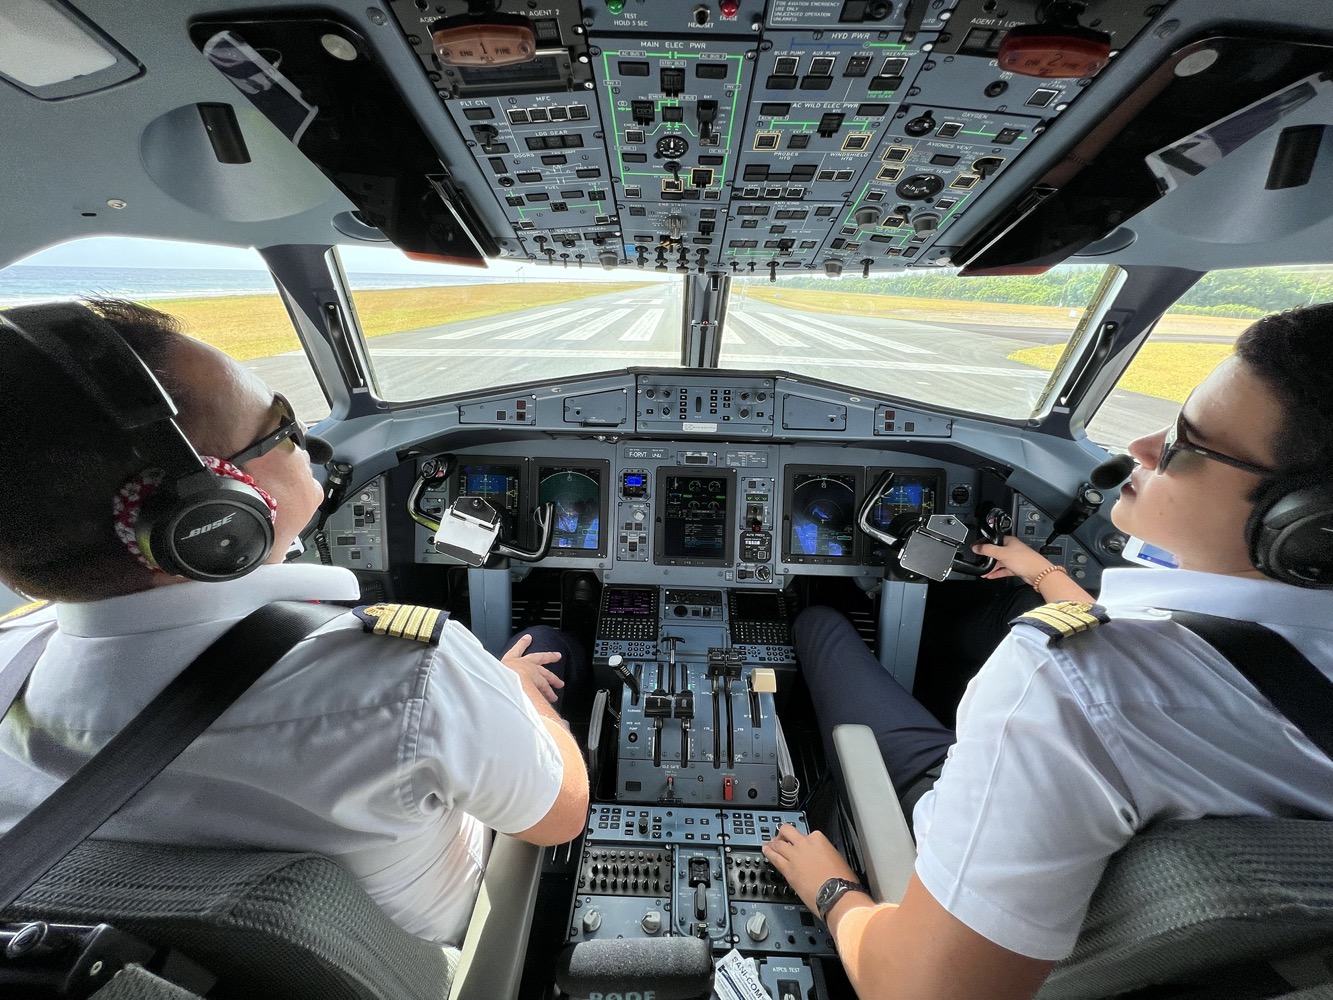 two people in the cockpit of an airplane